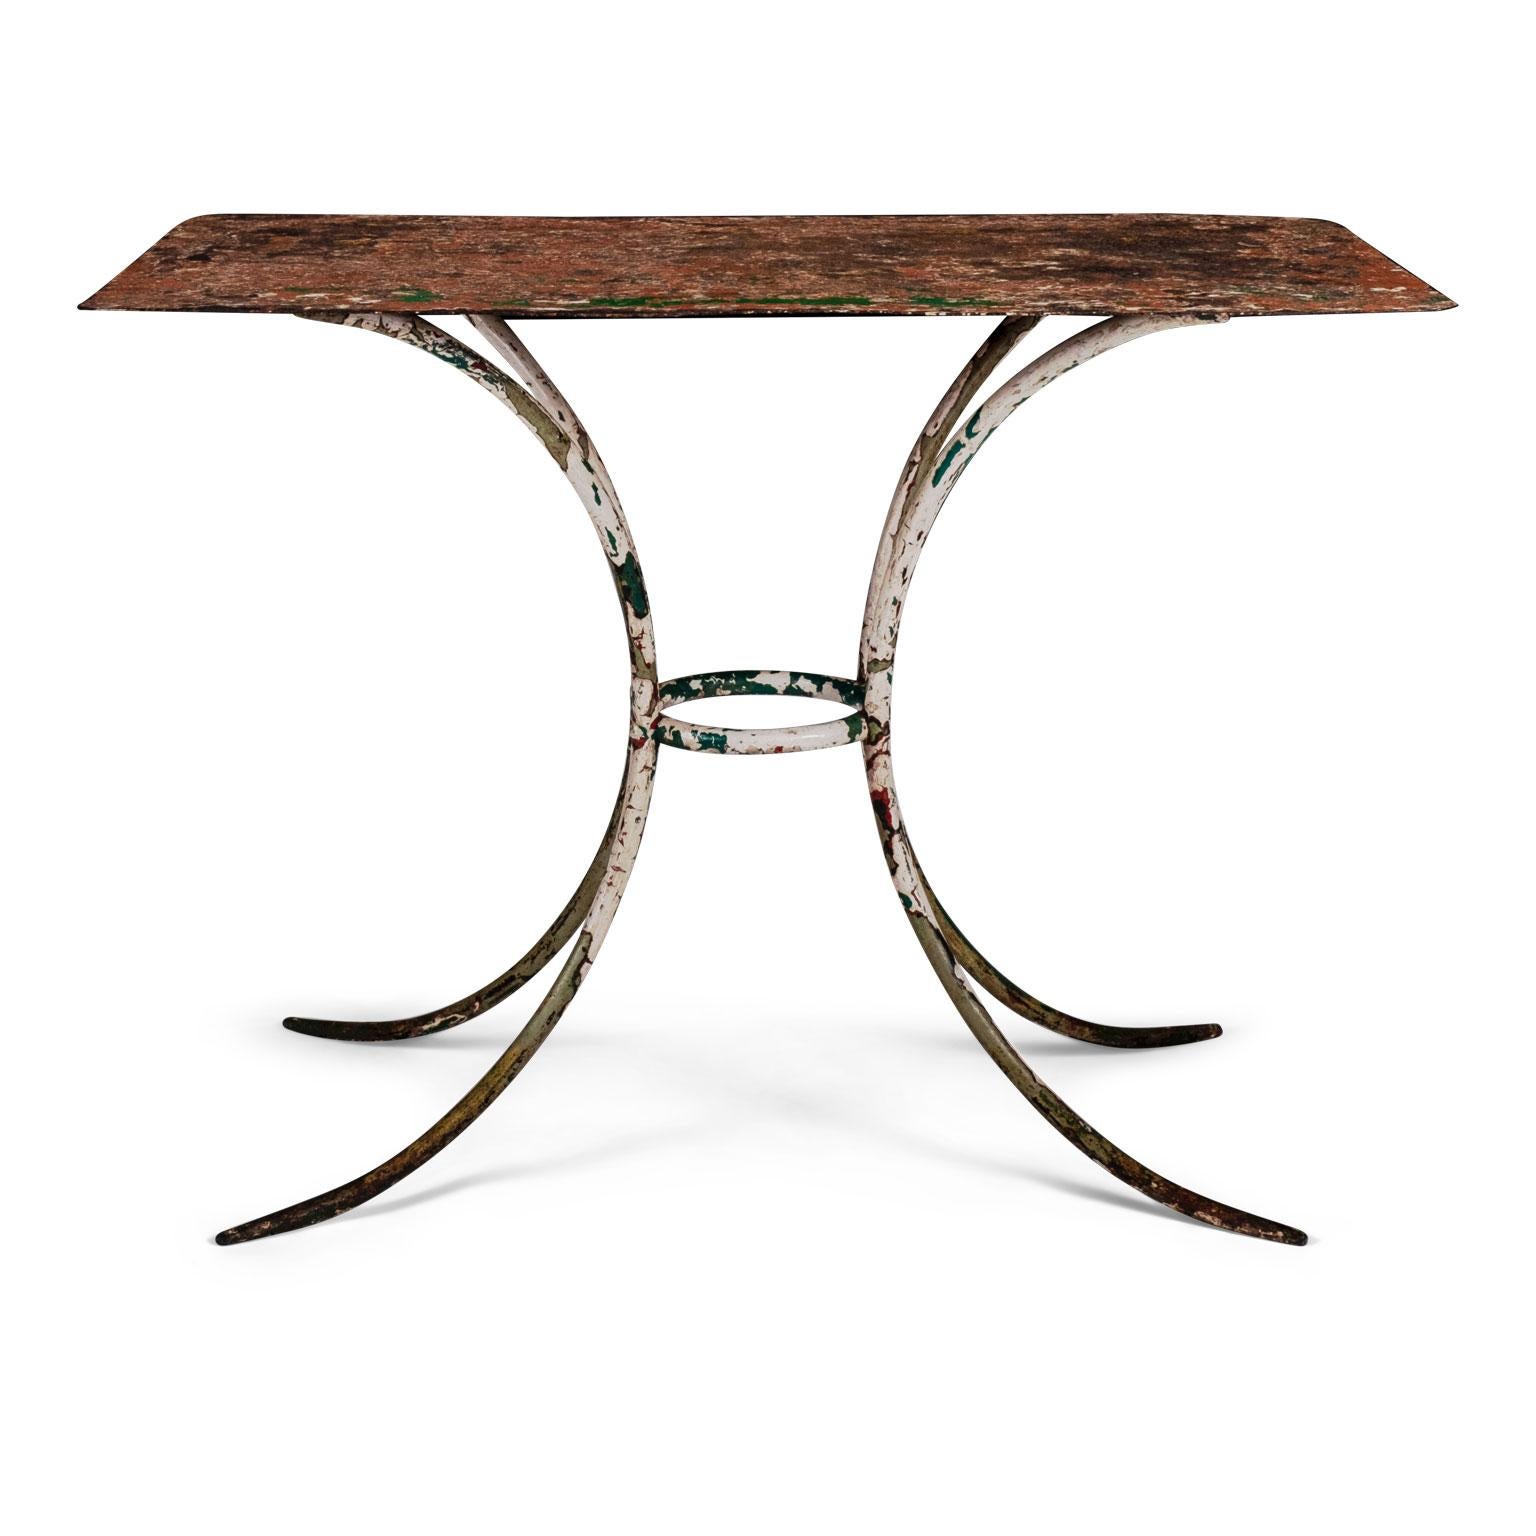 Painted iron garden table from France, circa 1930-1950. Rectangular steel top raised upon simple splayed legs. Covered in beautiful layers of rich white, green and terracotta color paint.